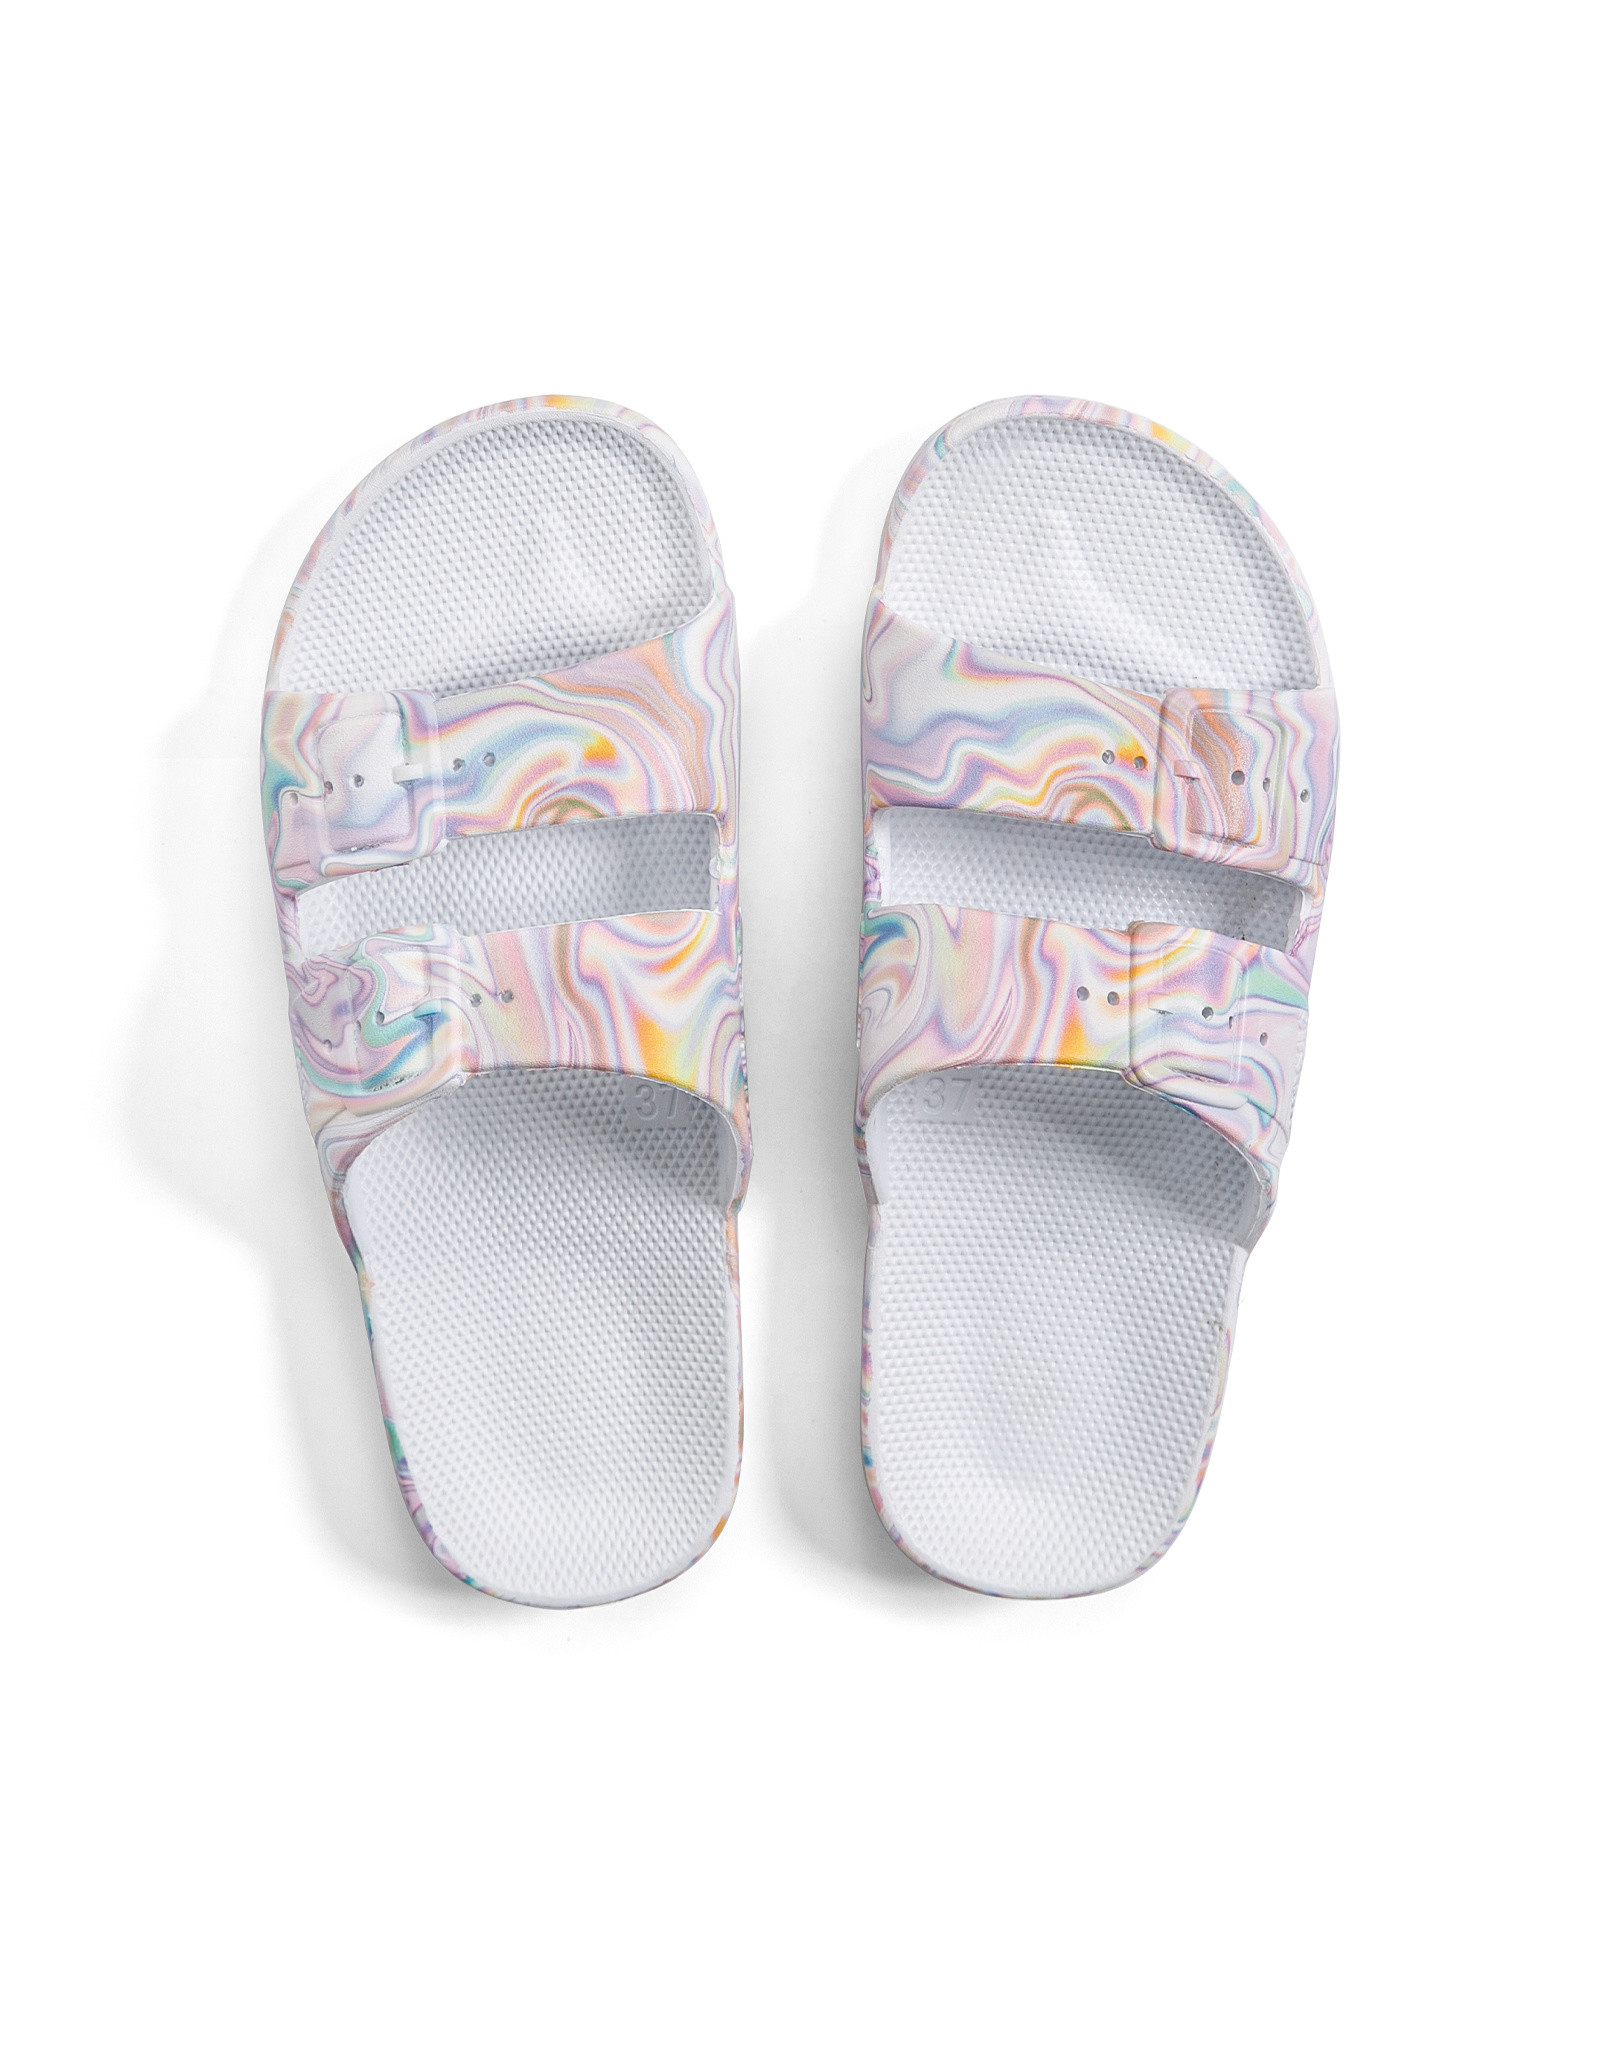 Freedom Moses Print Slides SP22 - Assorted Colors